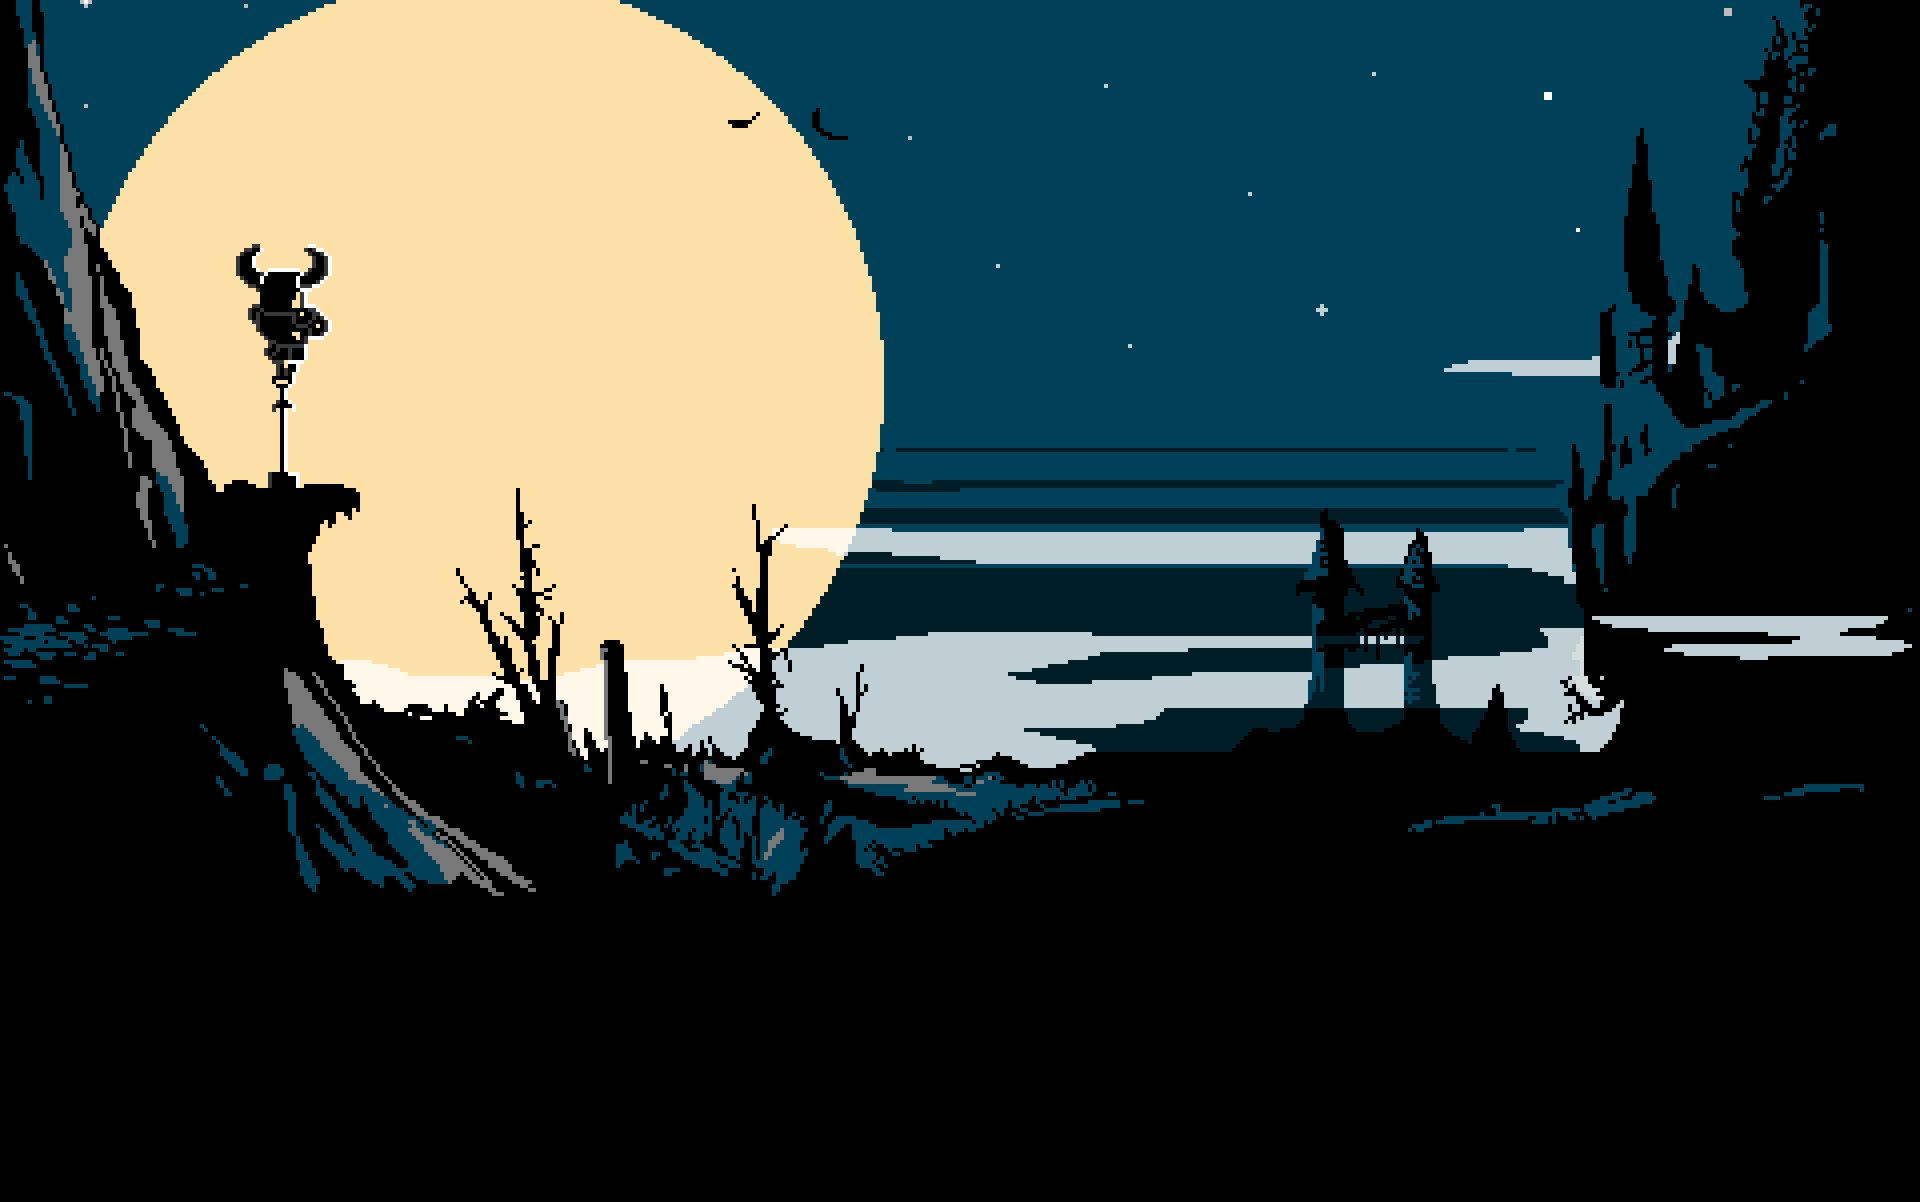 Shovel Knight Gazing At The Moon In A Serene Night Landscape